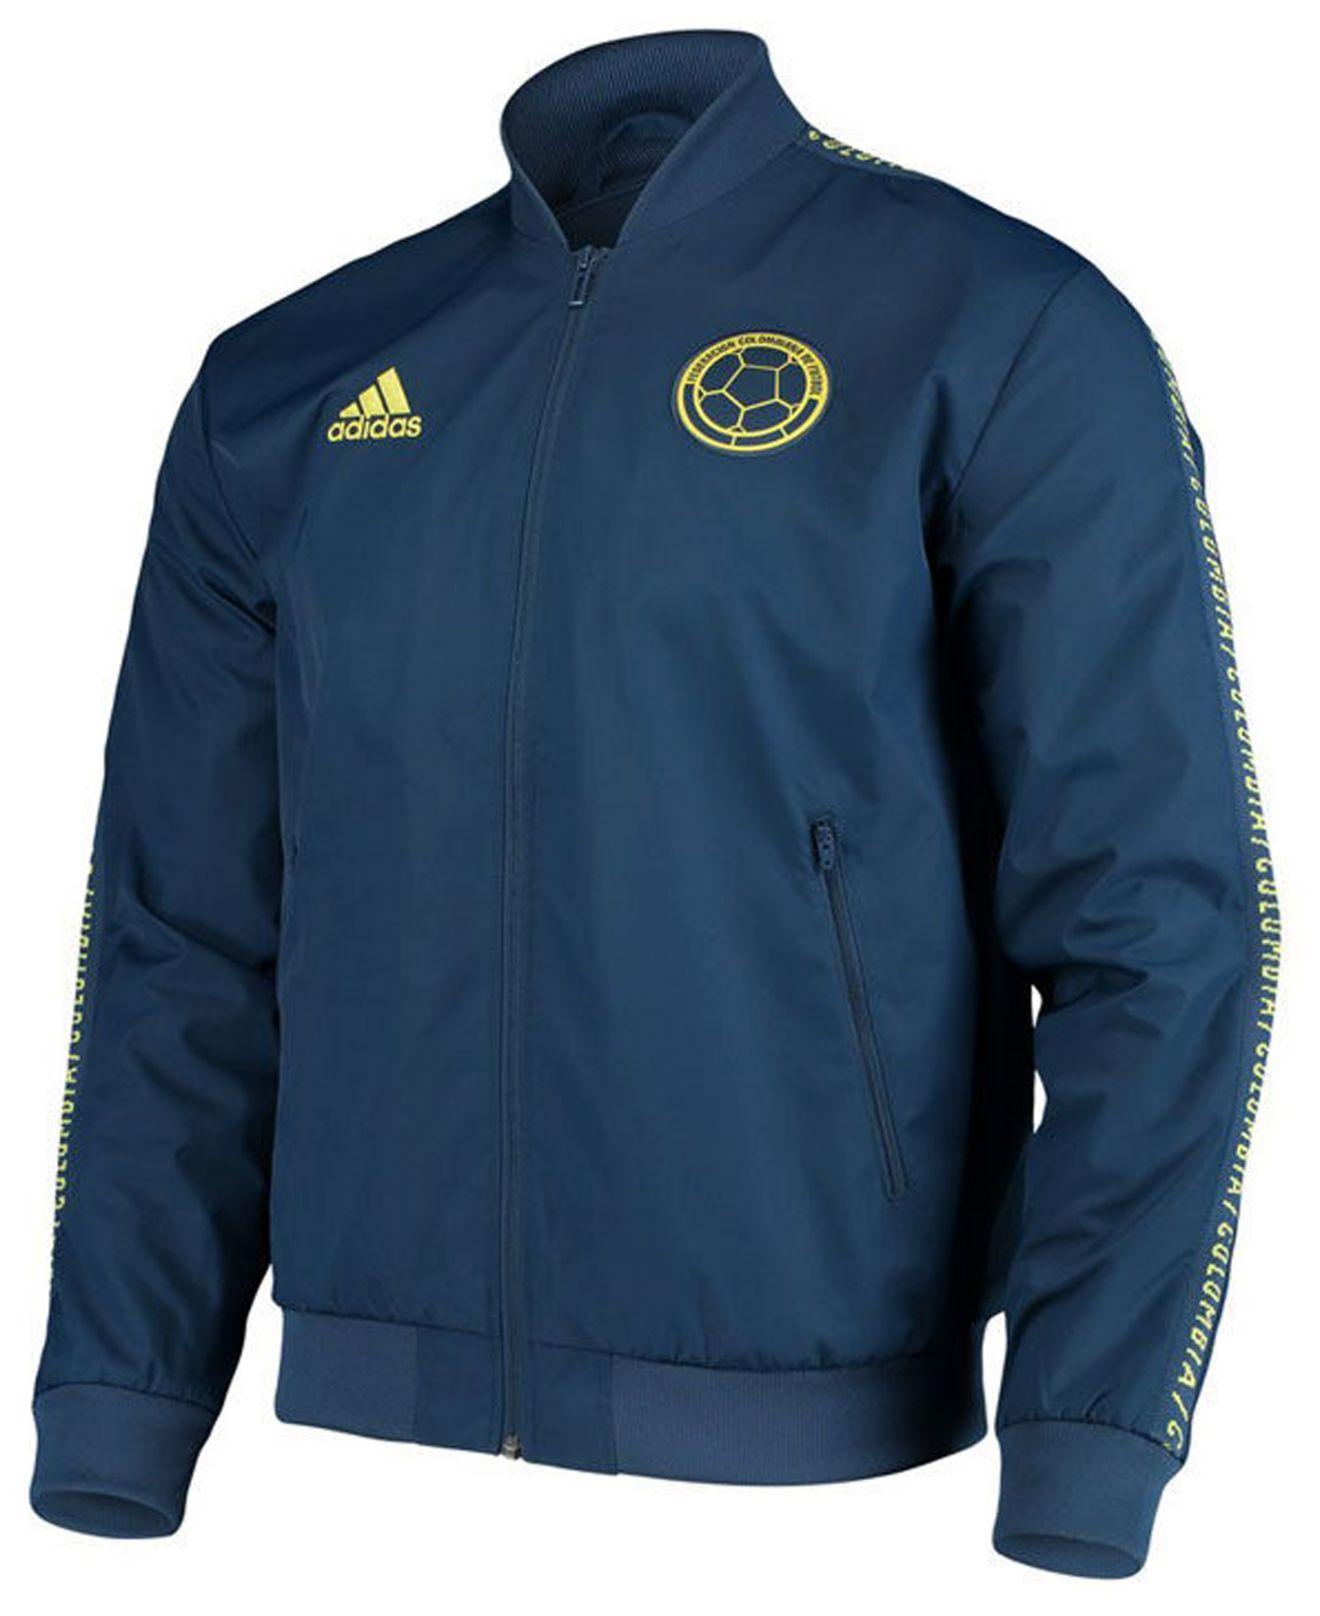 adidas Colombia National Team Anthem Jacket in Blue for Men - Lyst